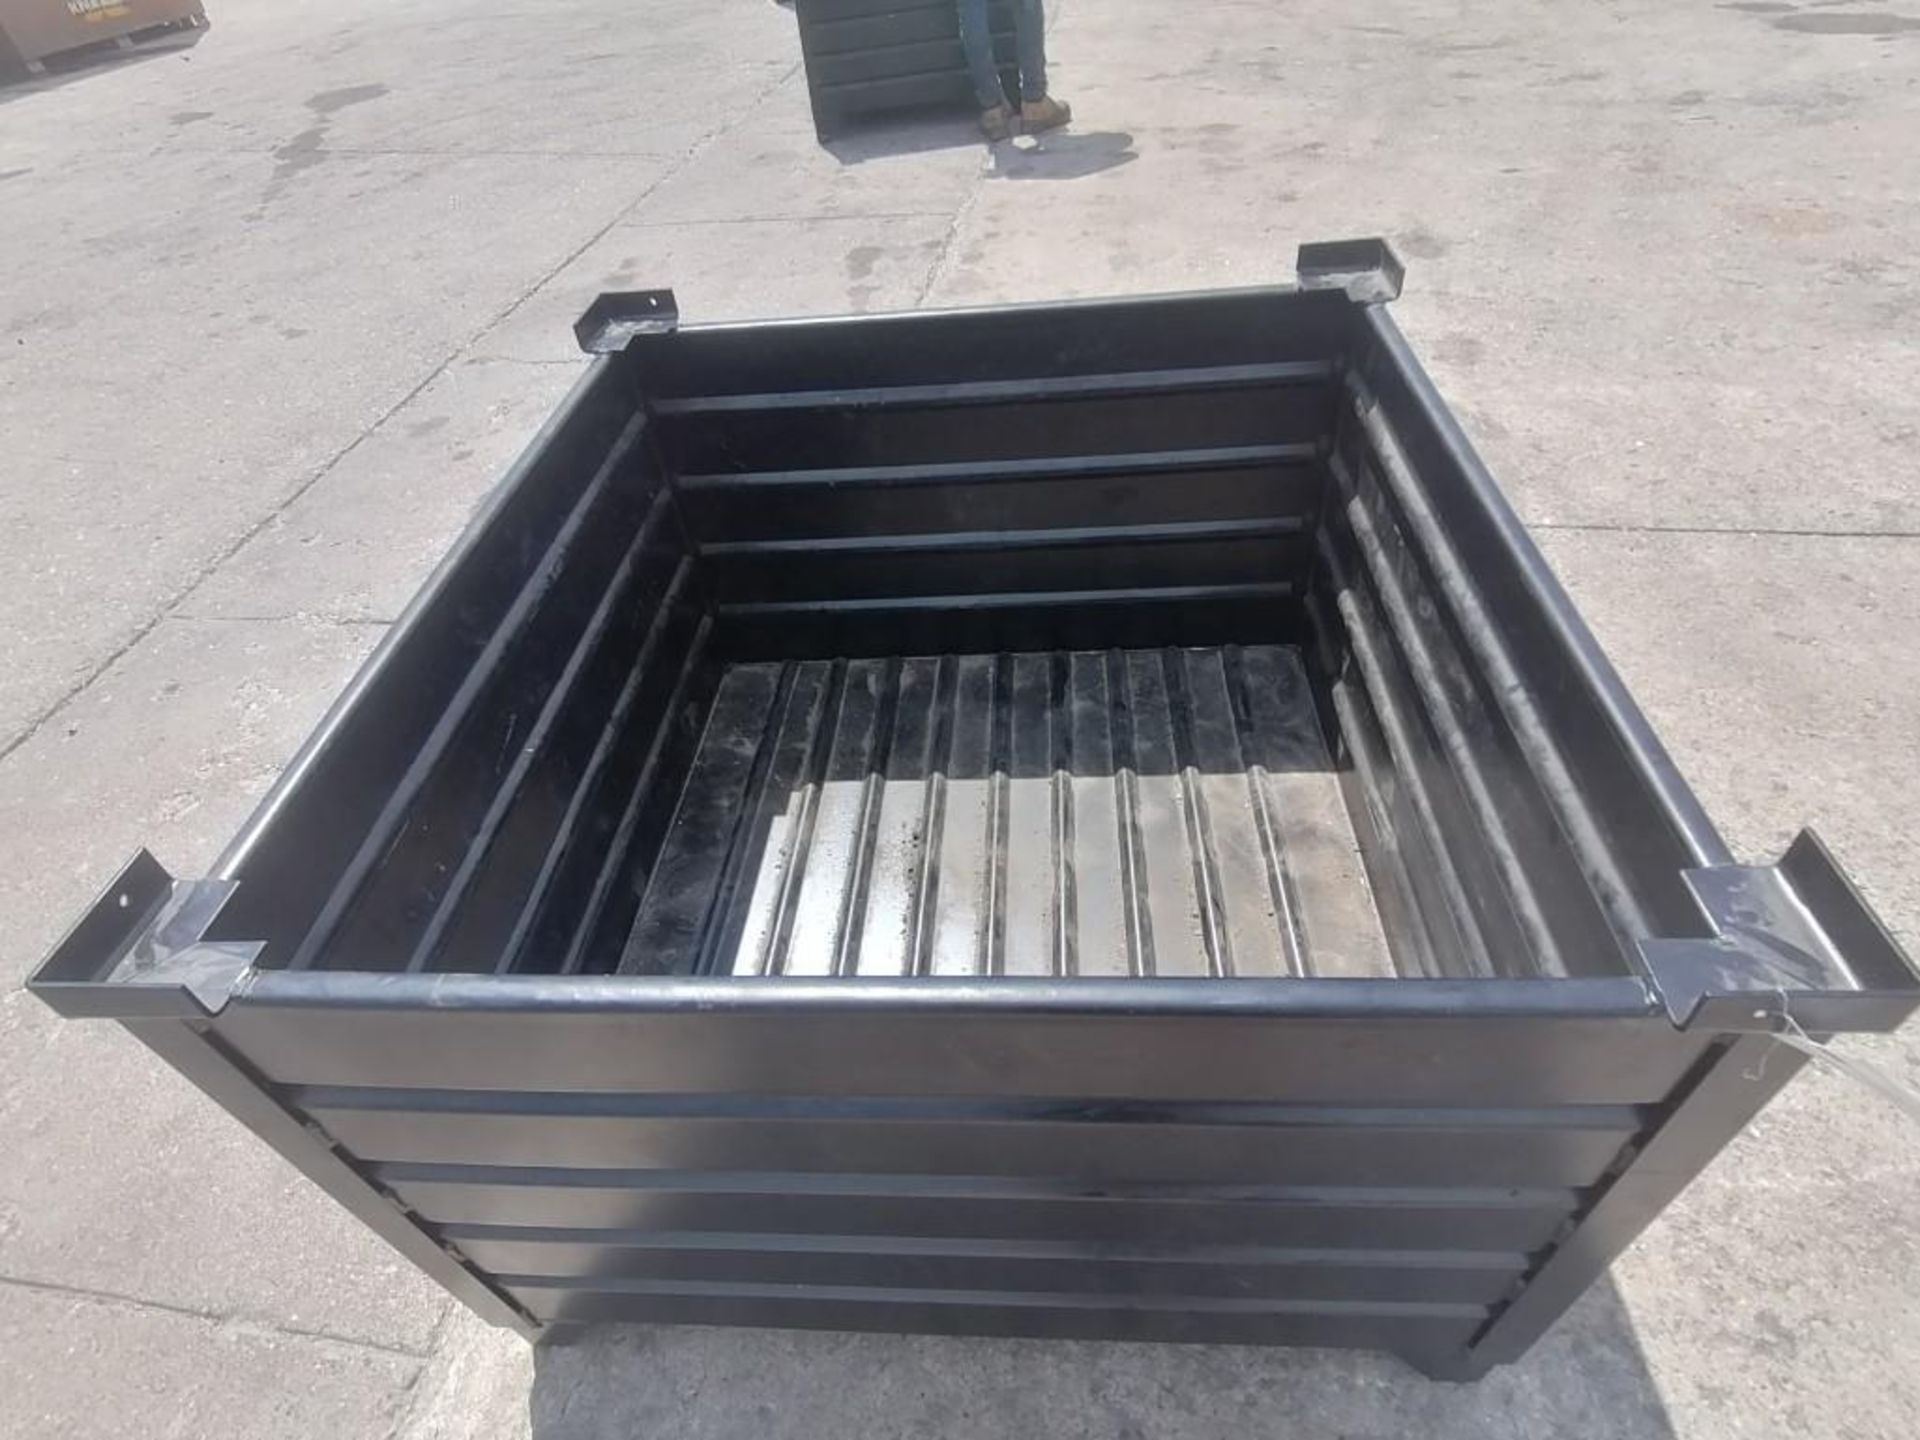 42" x 42" Stockable metal bin. Located at 301 E Henry Street, Mt. Pleasant, IA 52641. - Image 2 of 2